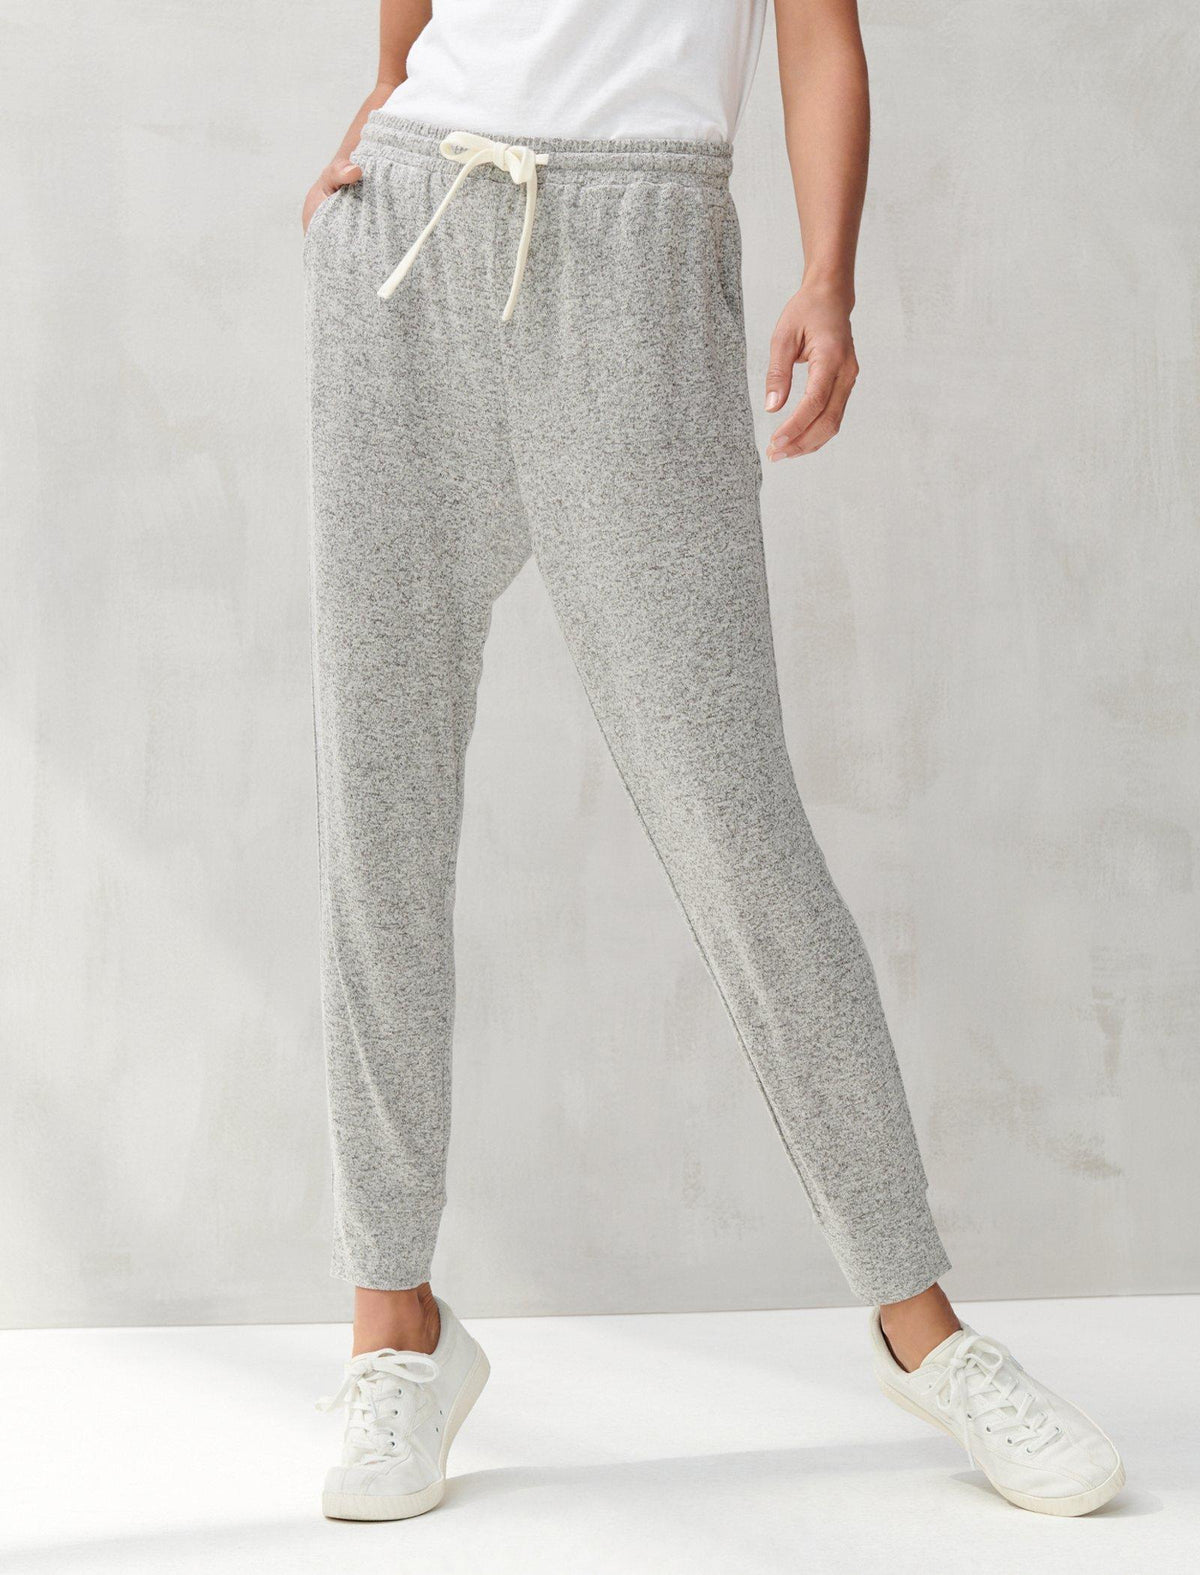 Lucky Brand Brushed Cloud Jersey Jogger - Lucky Brand Women's Pants Activewear Jogger Sweatpants Heather Grey